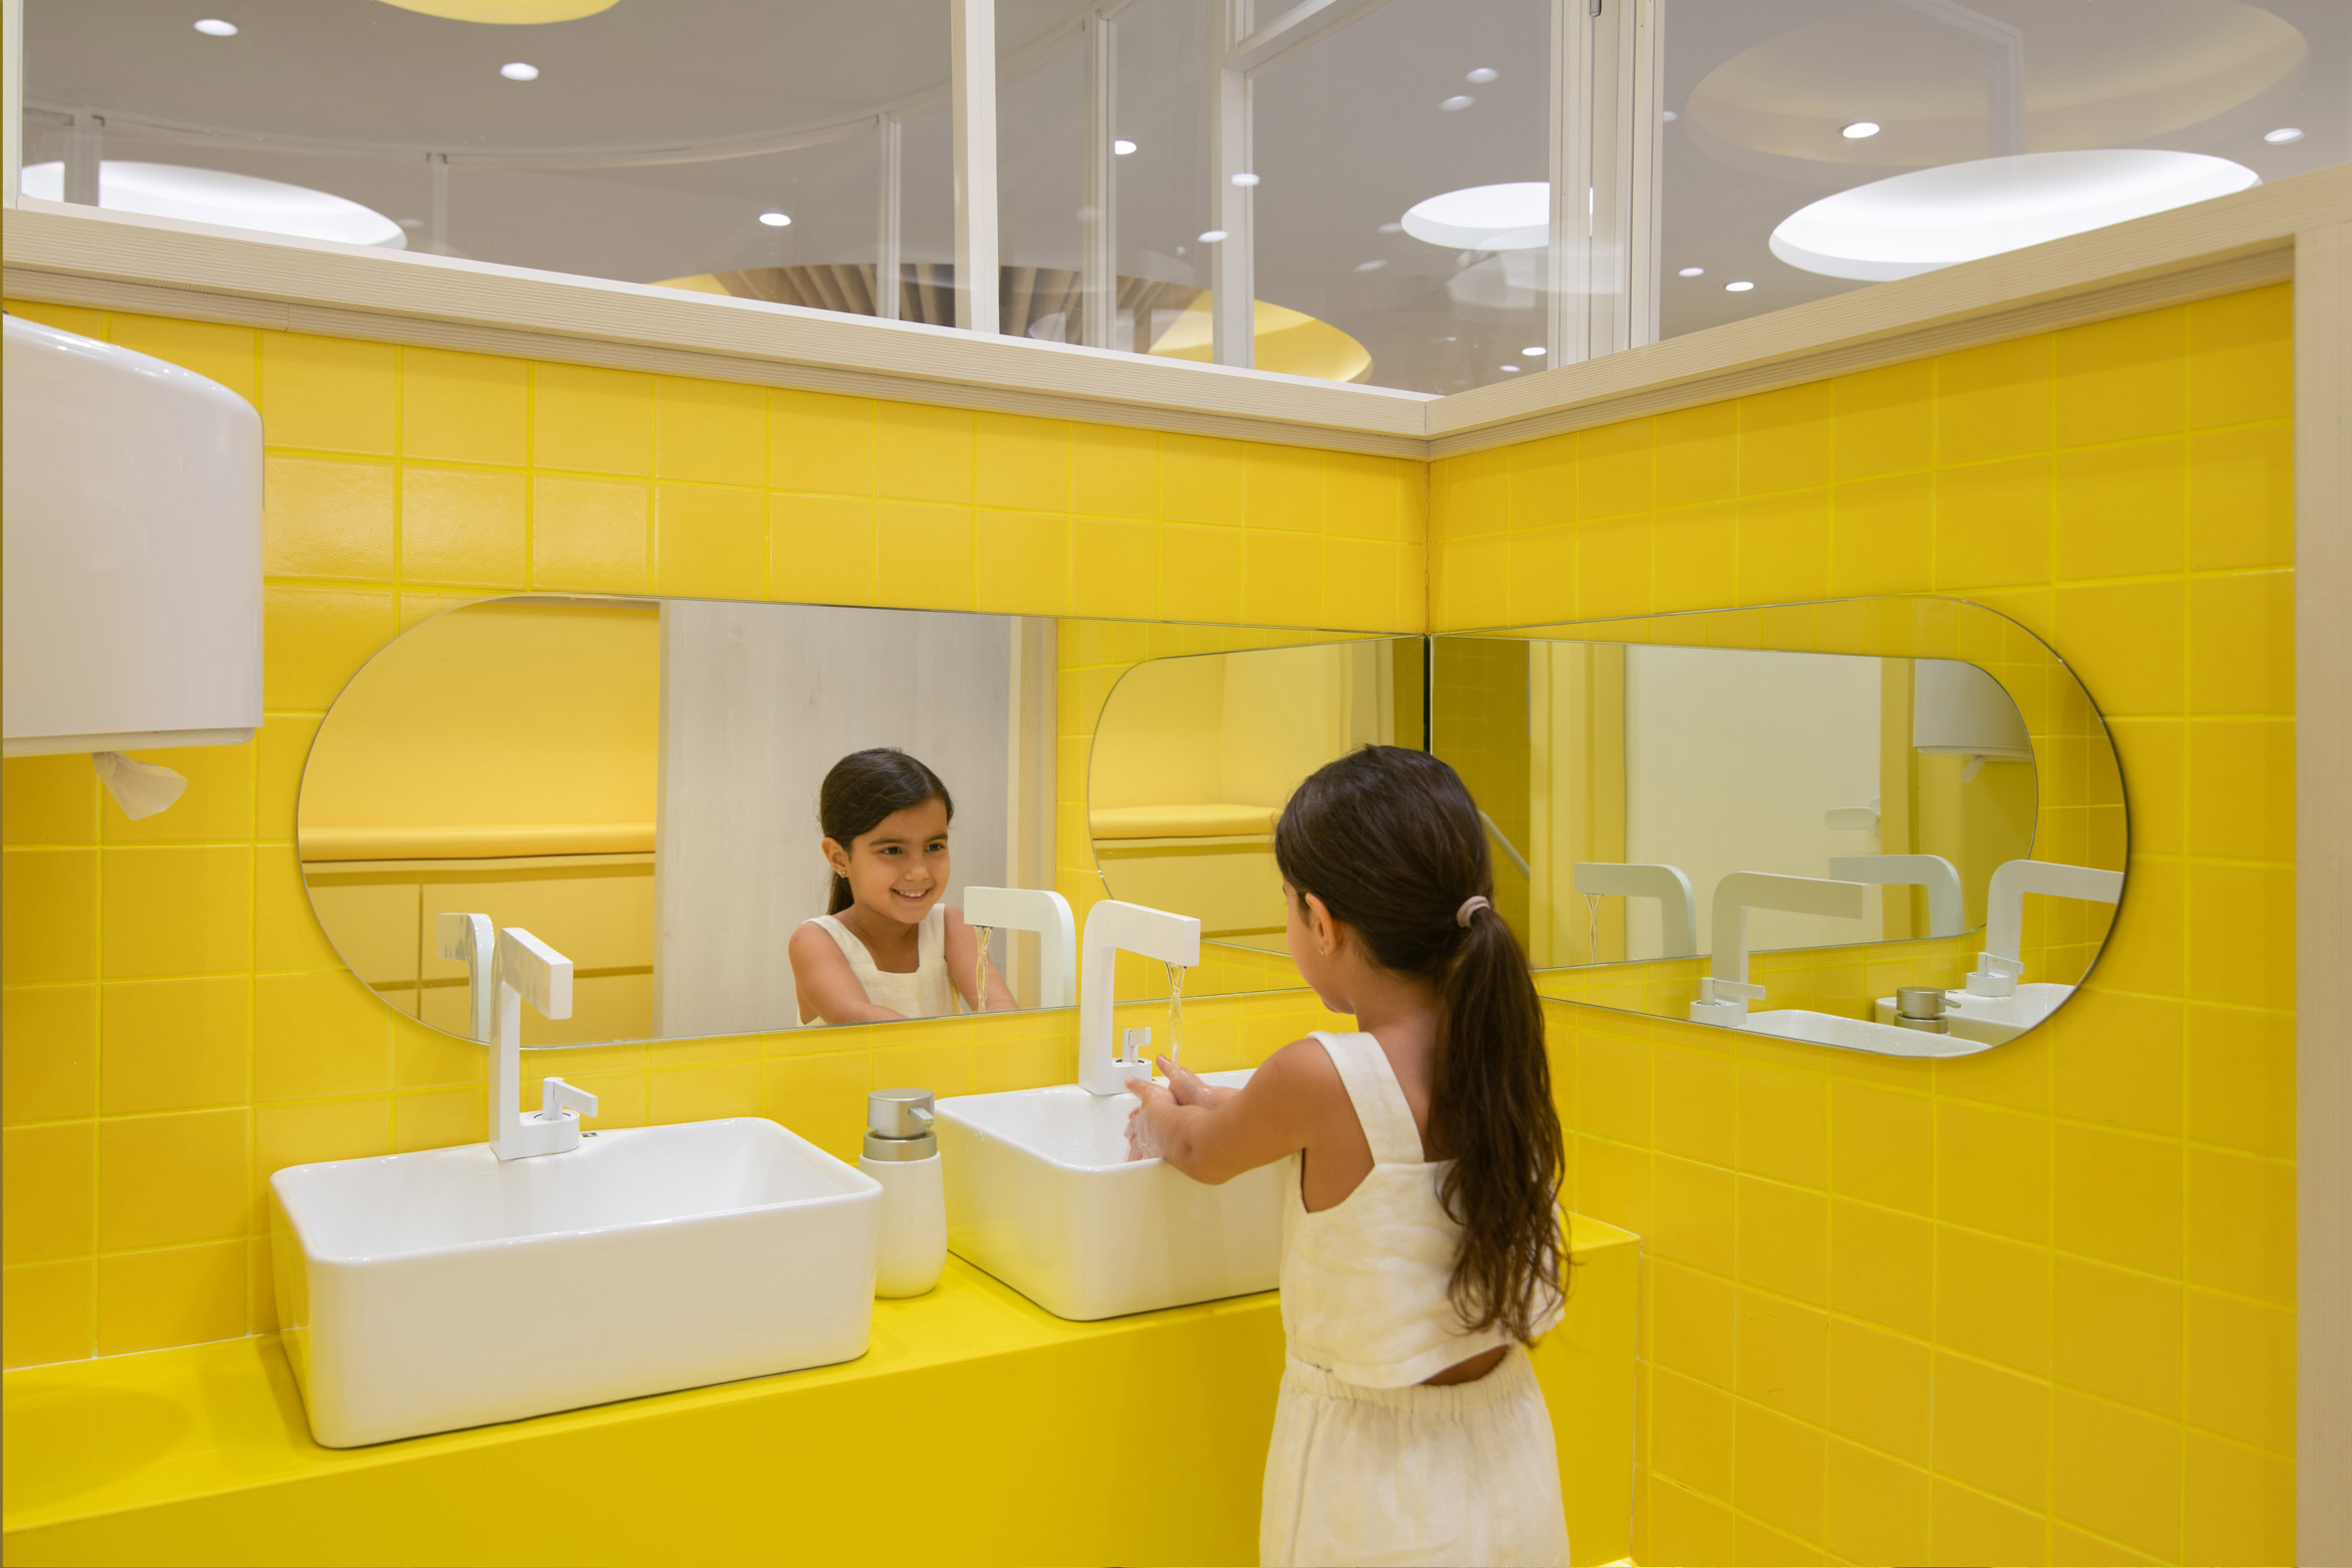 A girl washing her hands in a yellow bathroom